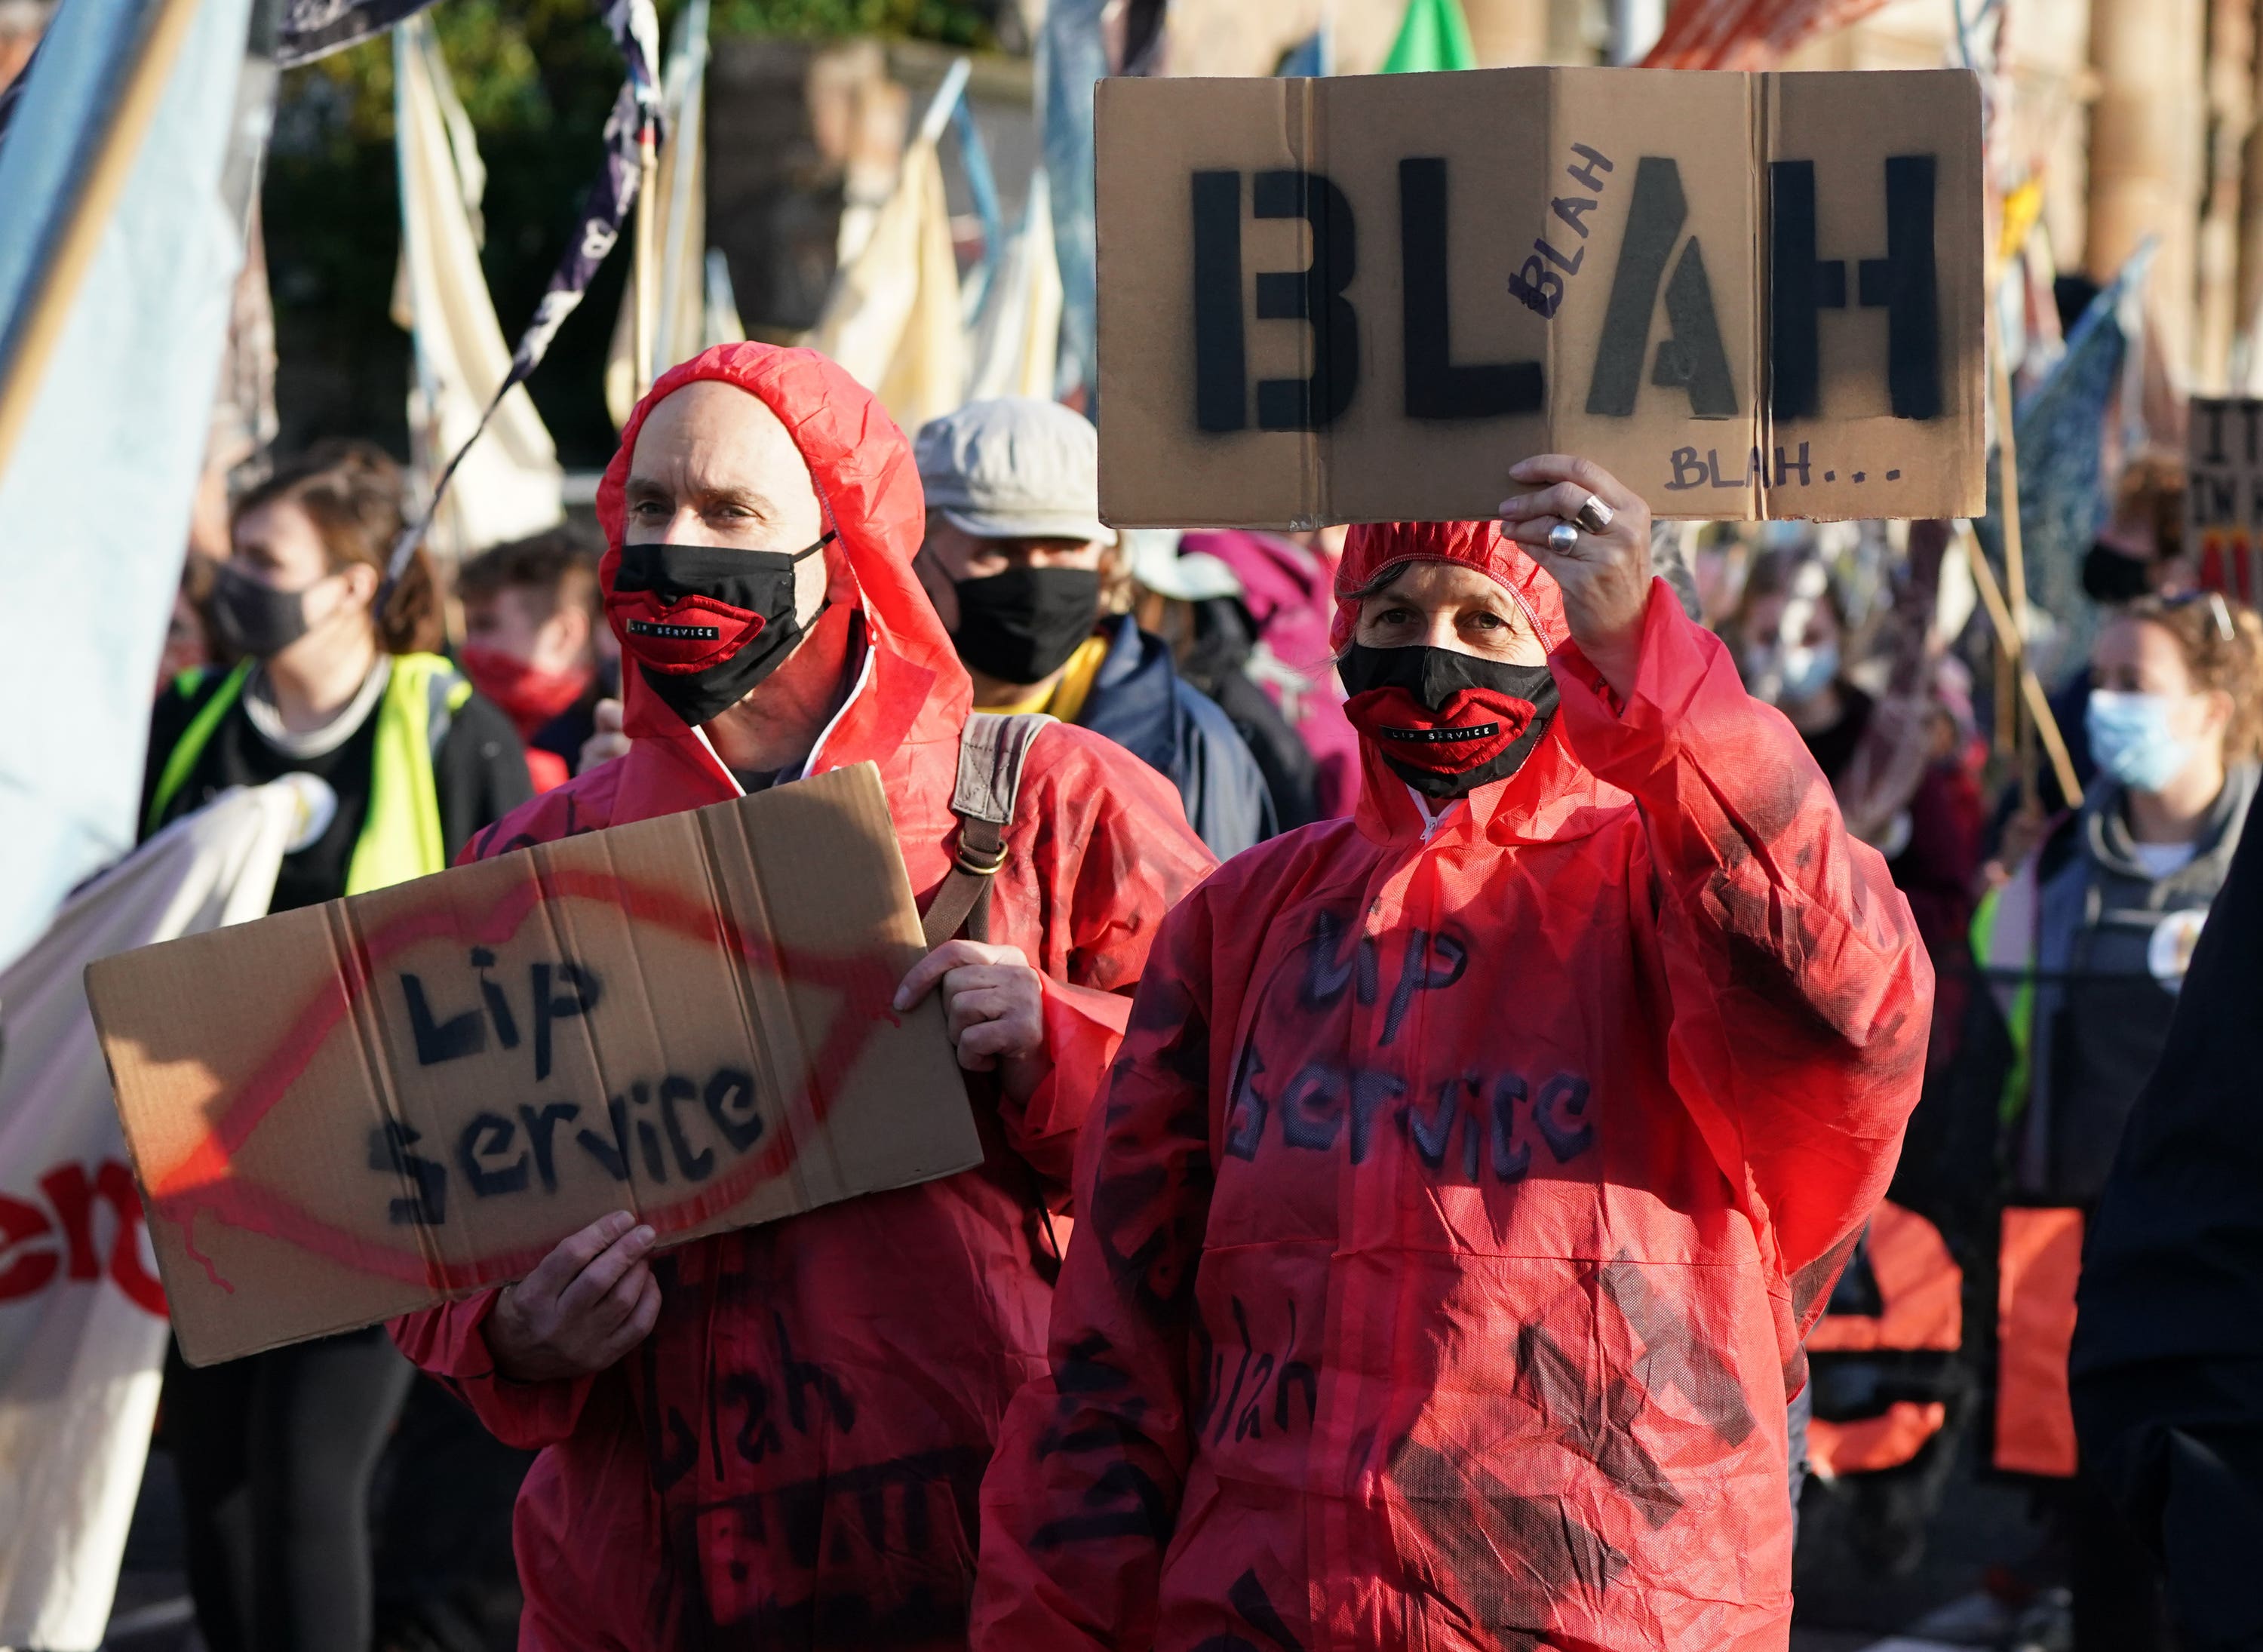 Coining a phrase used by climate champion Greta Thunberg, campaigners made it clear they will no longer accept ‘blah blah blah’ from leaders.